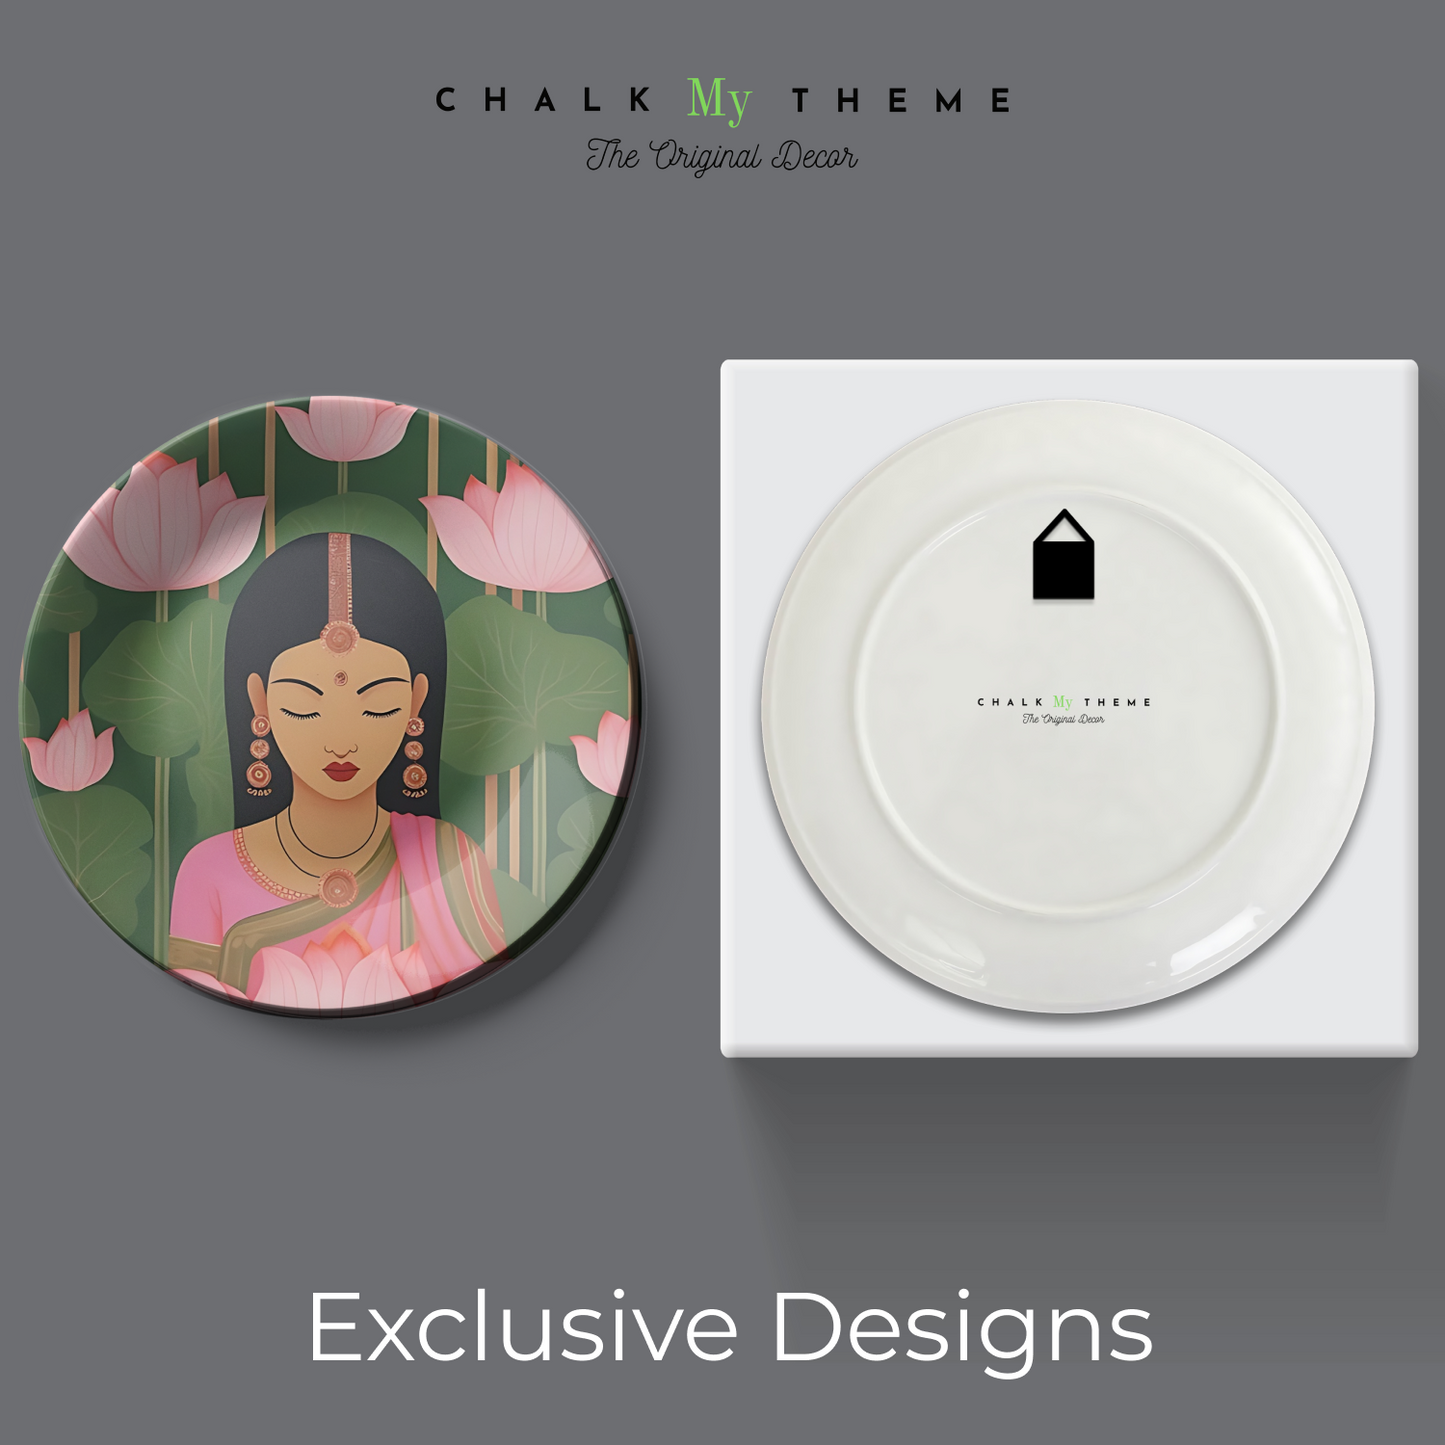 Cultural ceramic decorative plates to hang on wall